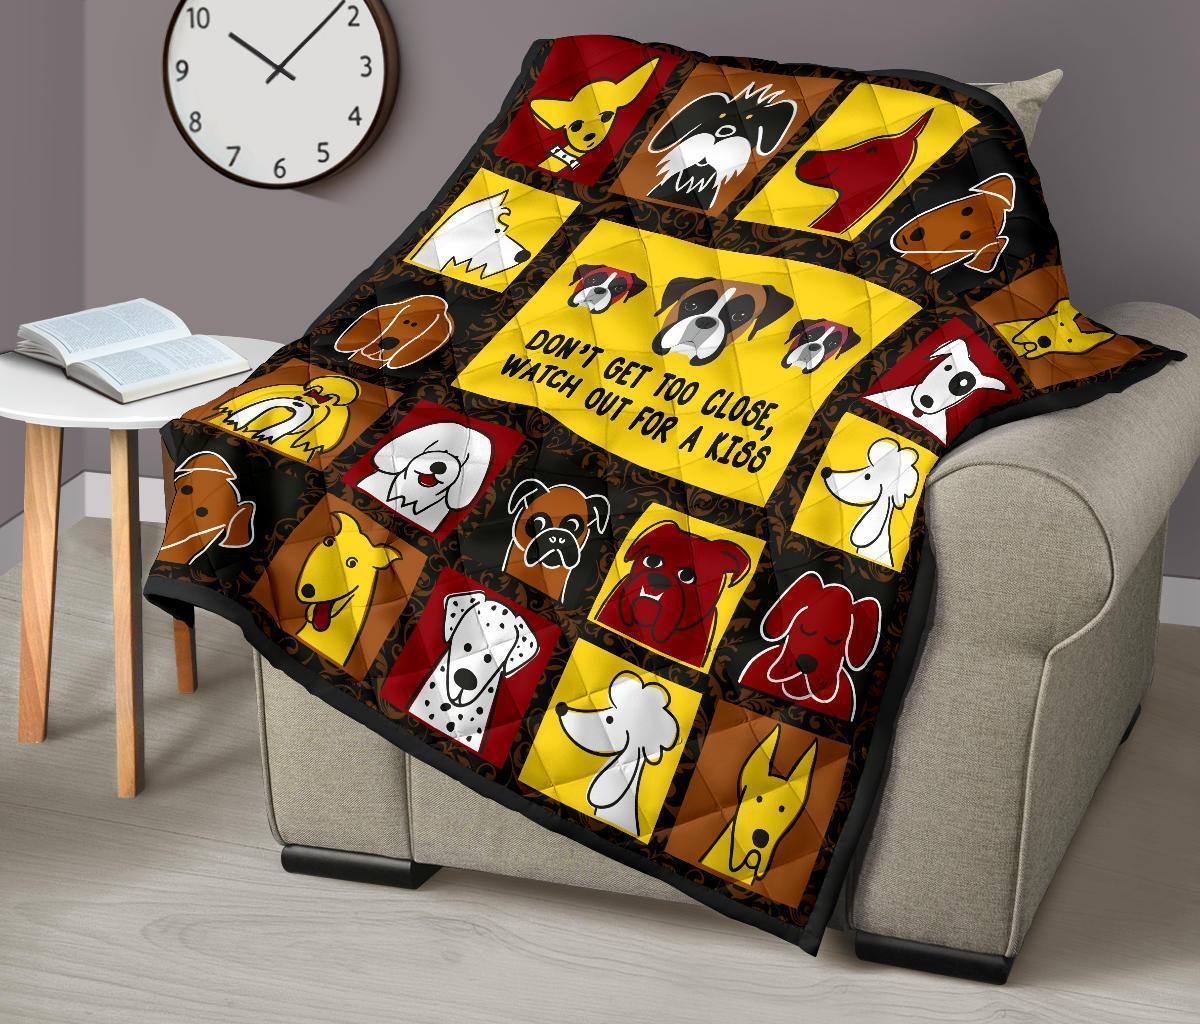 Watch Out For A Kiss Dog Quilt Blanket-Gear Wanta